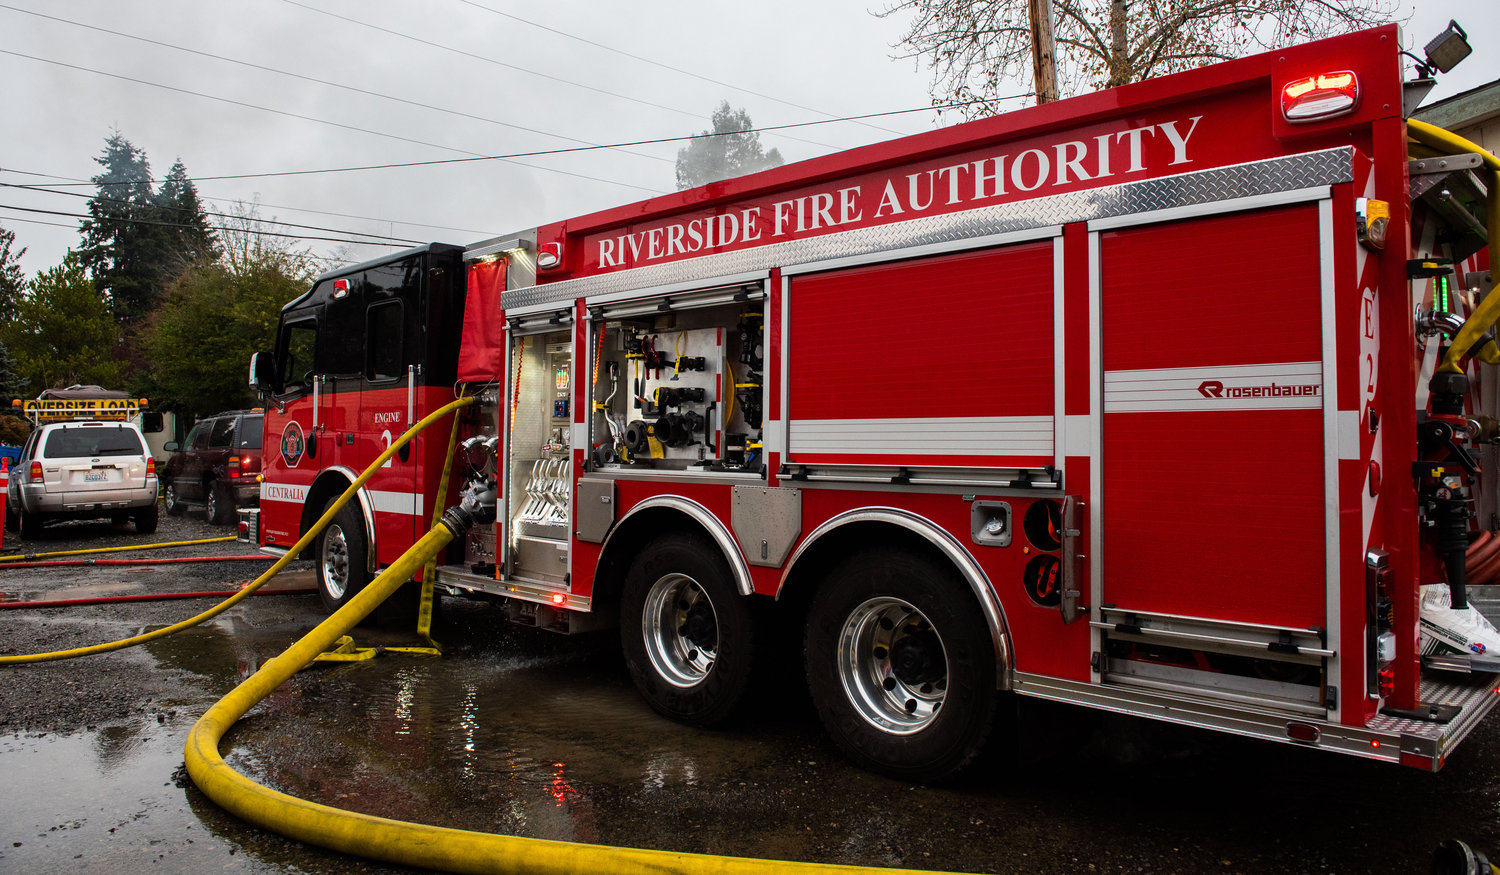 A Riverside fire engine responds to a residential structure fire off W. Main Street in Centralia on Sunday.